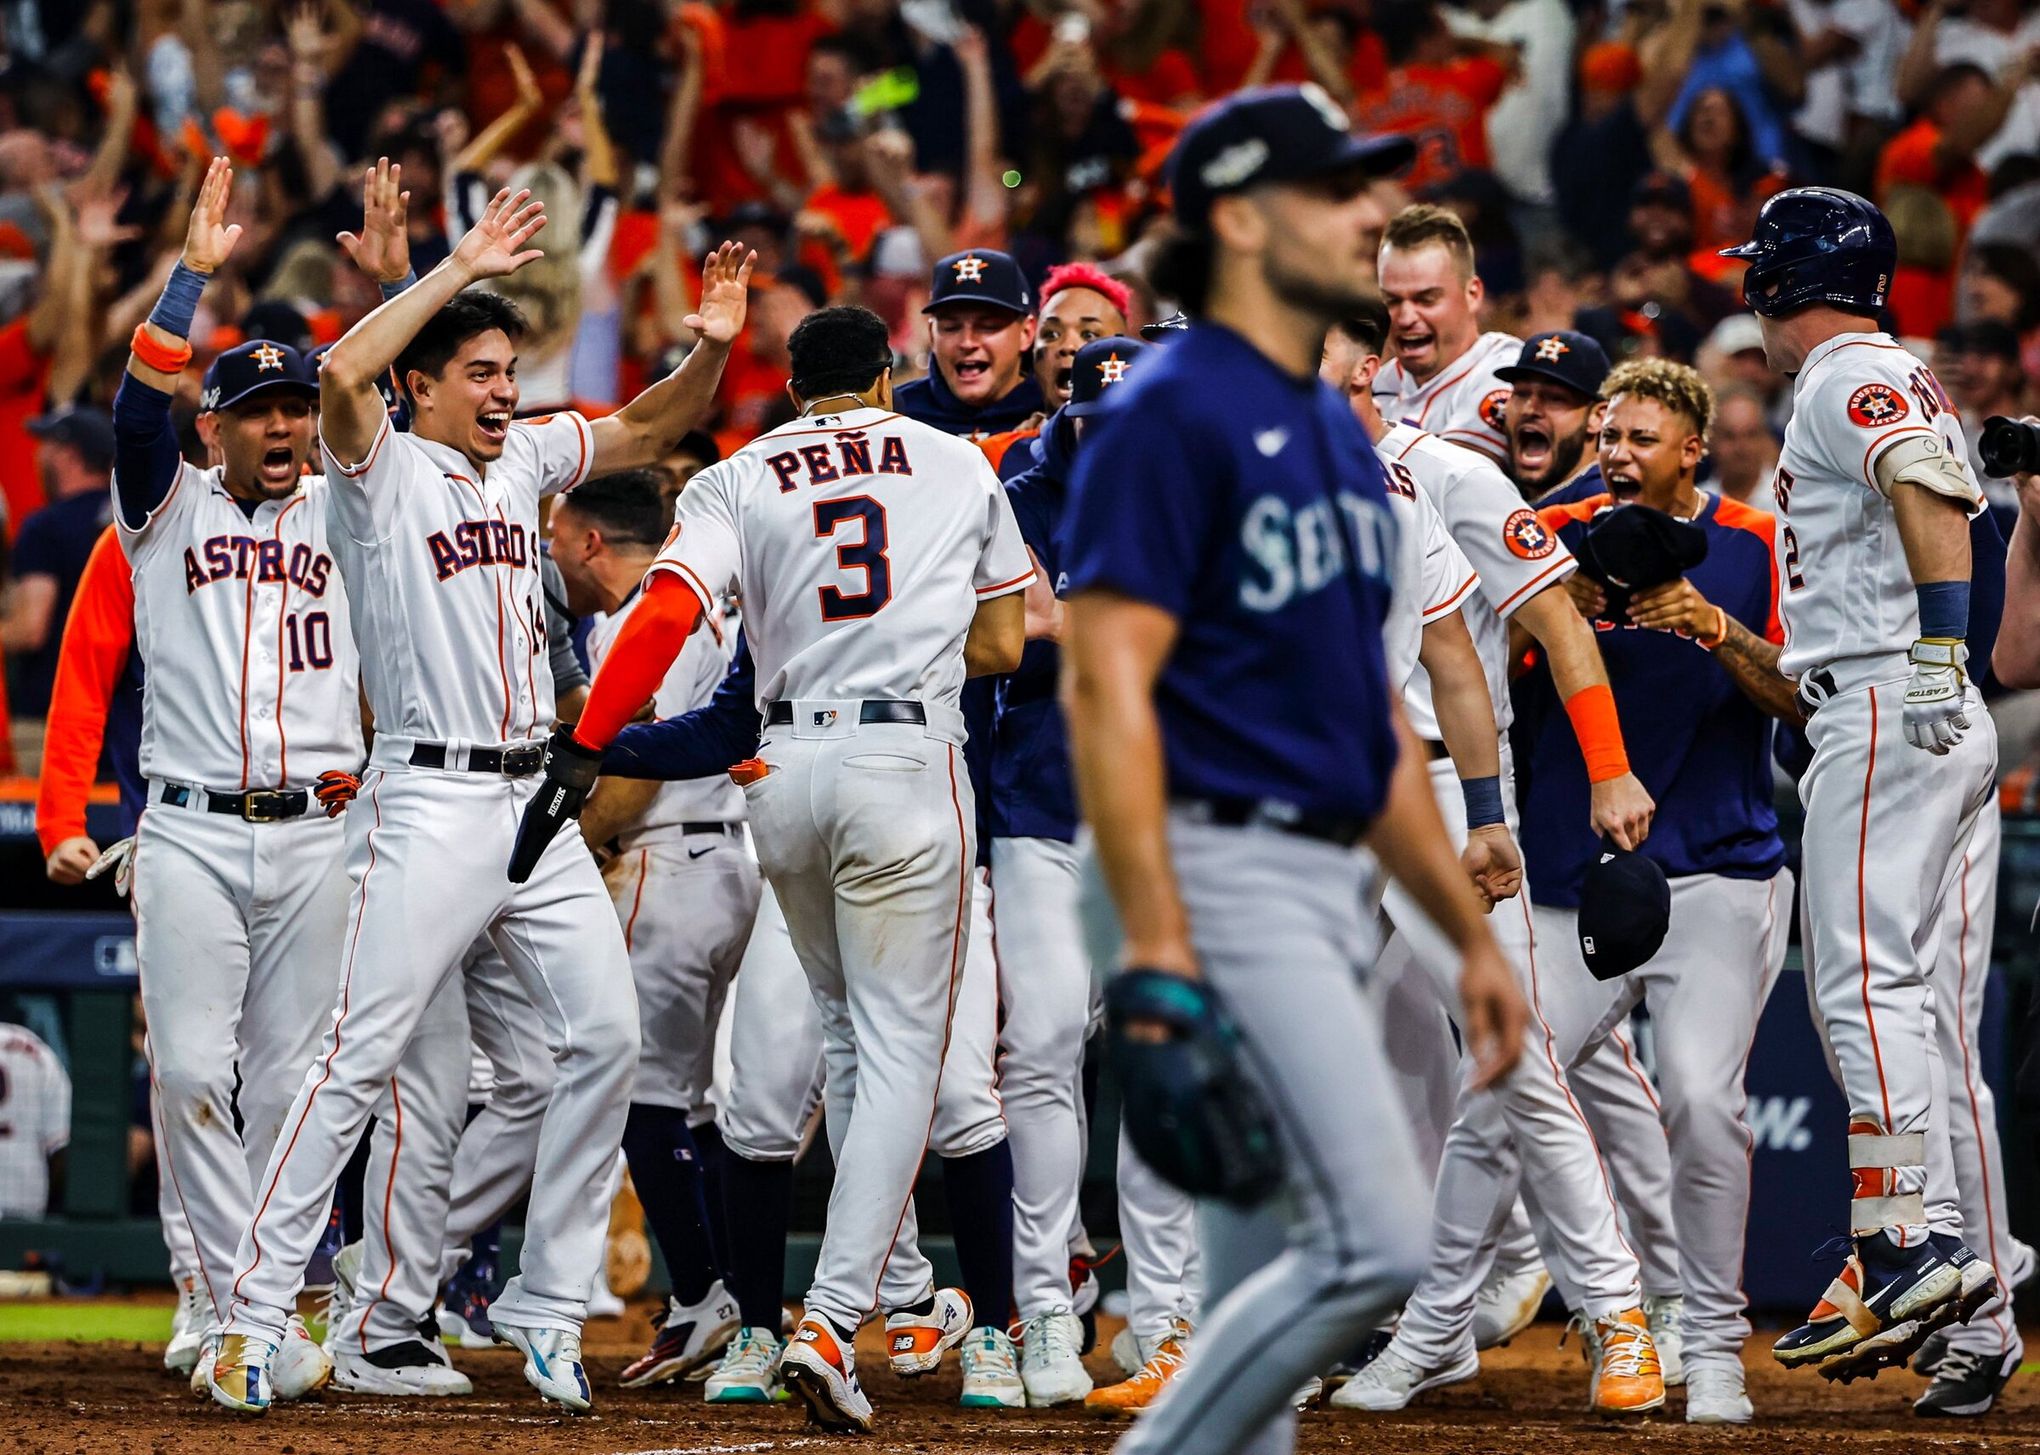 Astros Announce First Pitch Participants Ahead of World Series Game 1